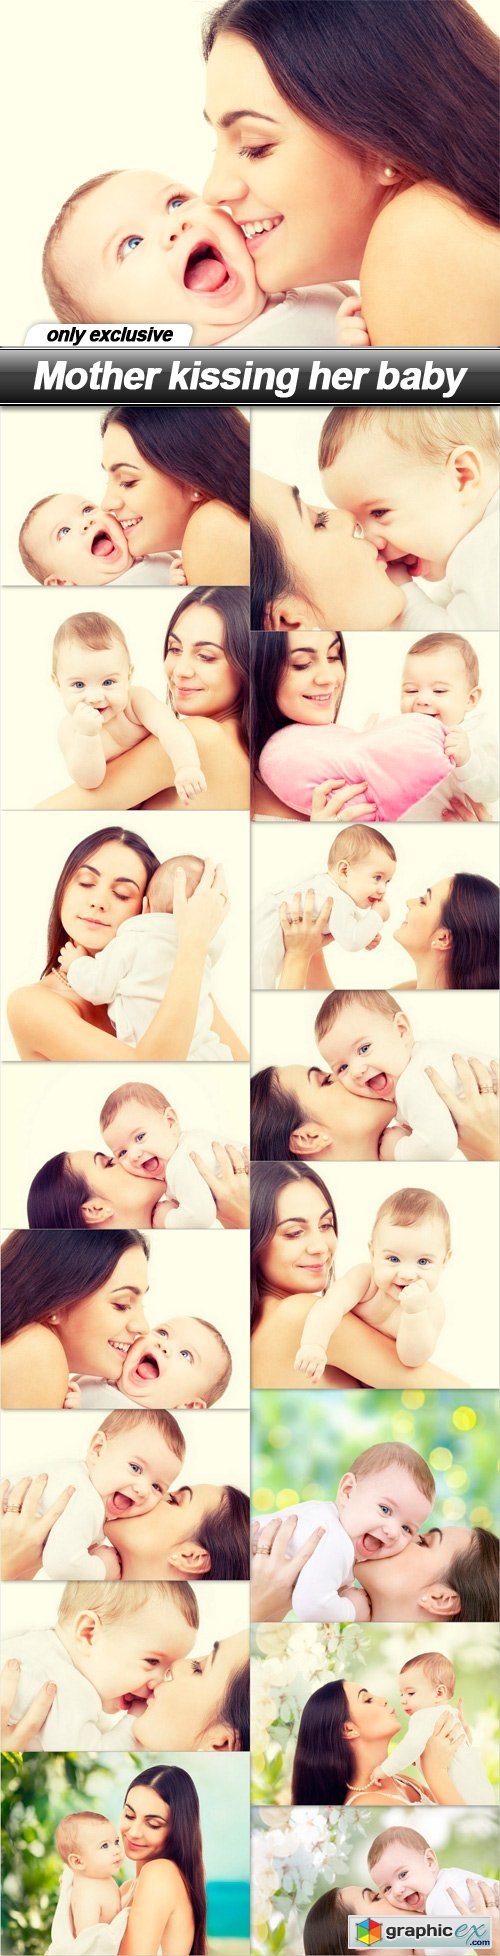 Mother kissing her baby - 16 UHQ JPEG